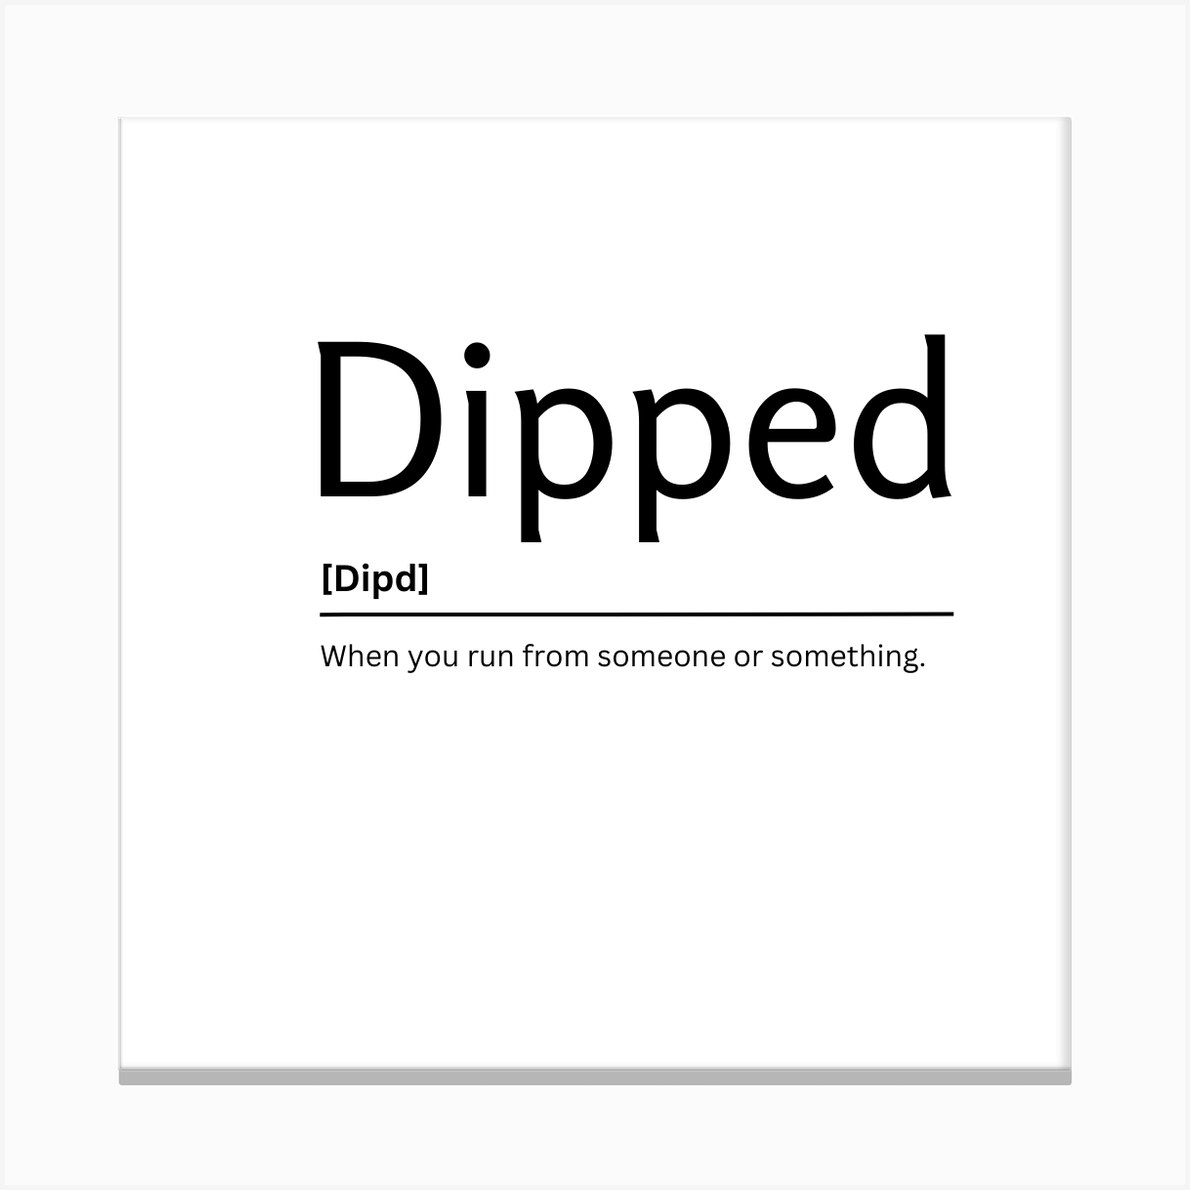 Dickweed Dictionary Definition Funny Quote Art Print Art Print by Kaigozen  - Fy